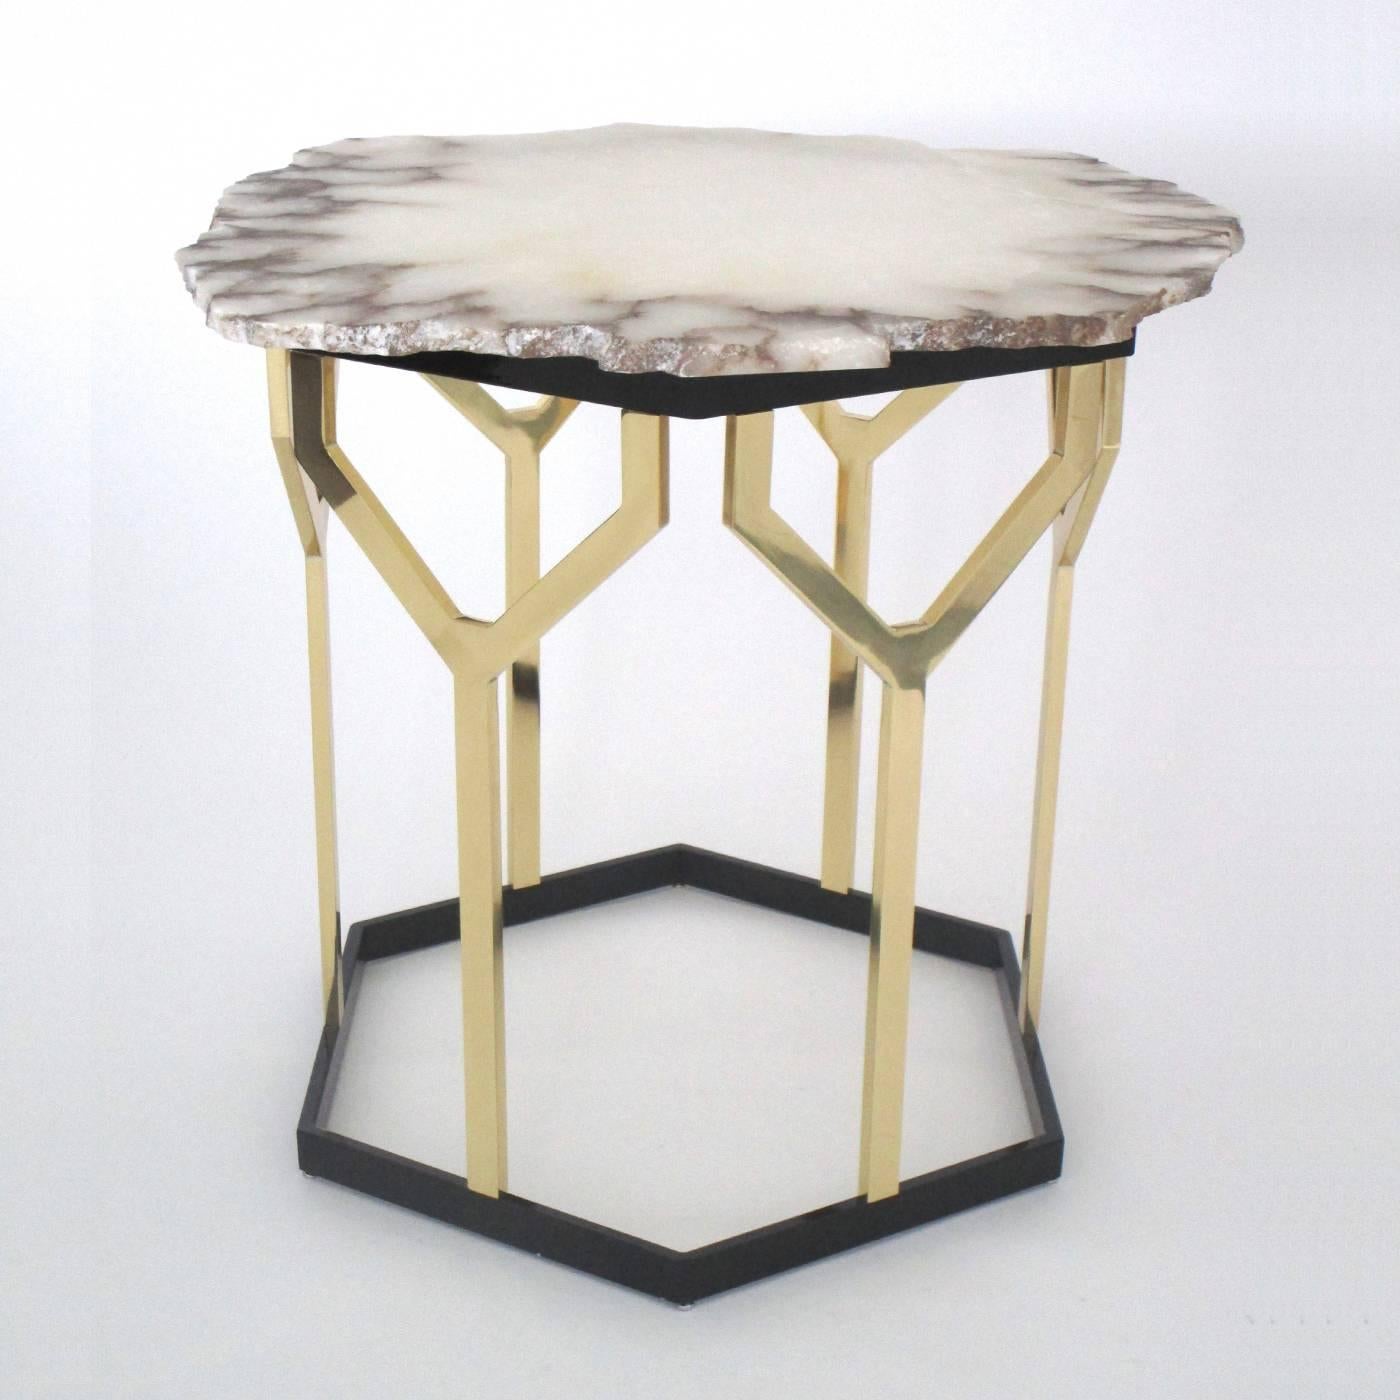 This elegant table features an hexagonal base in iron that supports a geometric structure in polished brass. The top is a slab in natural alabaster with irregular edges that make this a perfect accent piece with a modern appeal.